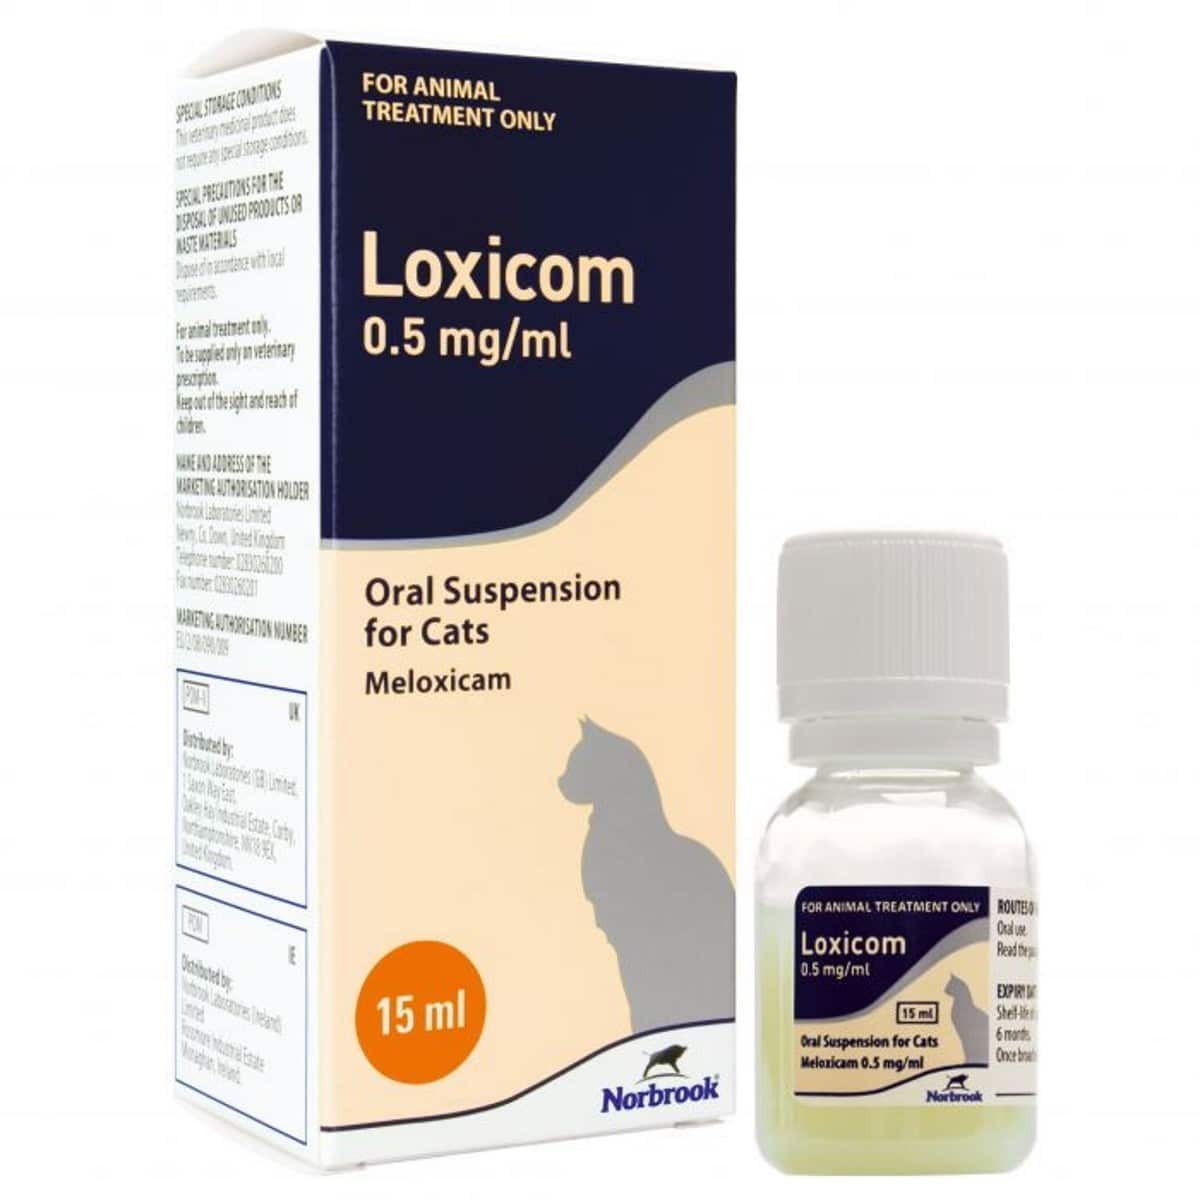 PetMd: Loxicom For Cats Side Effects